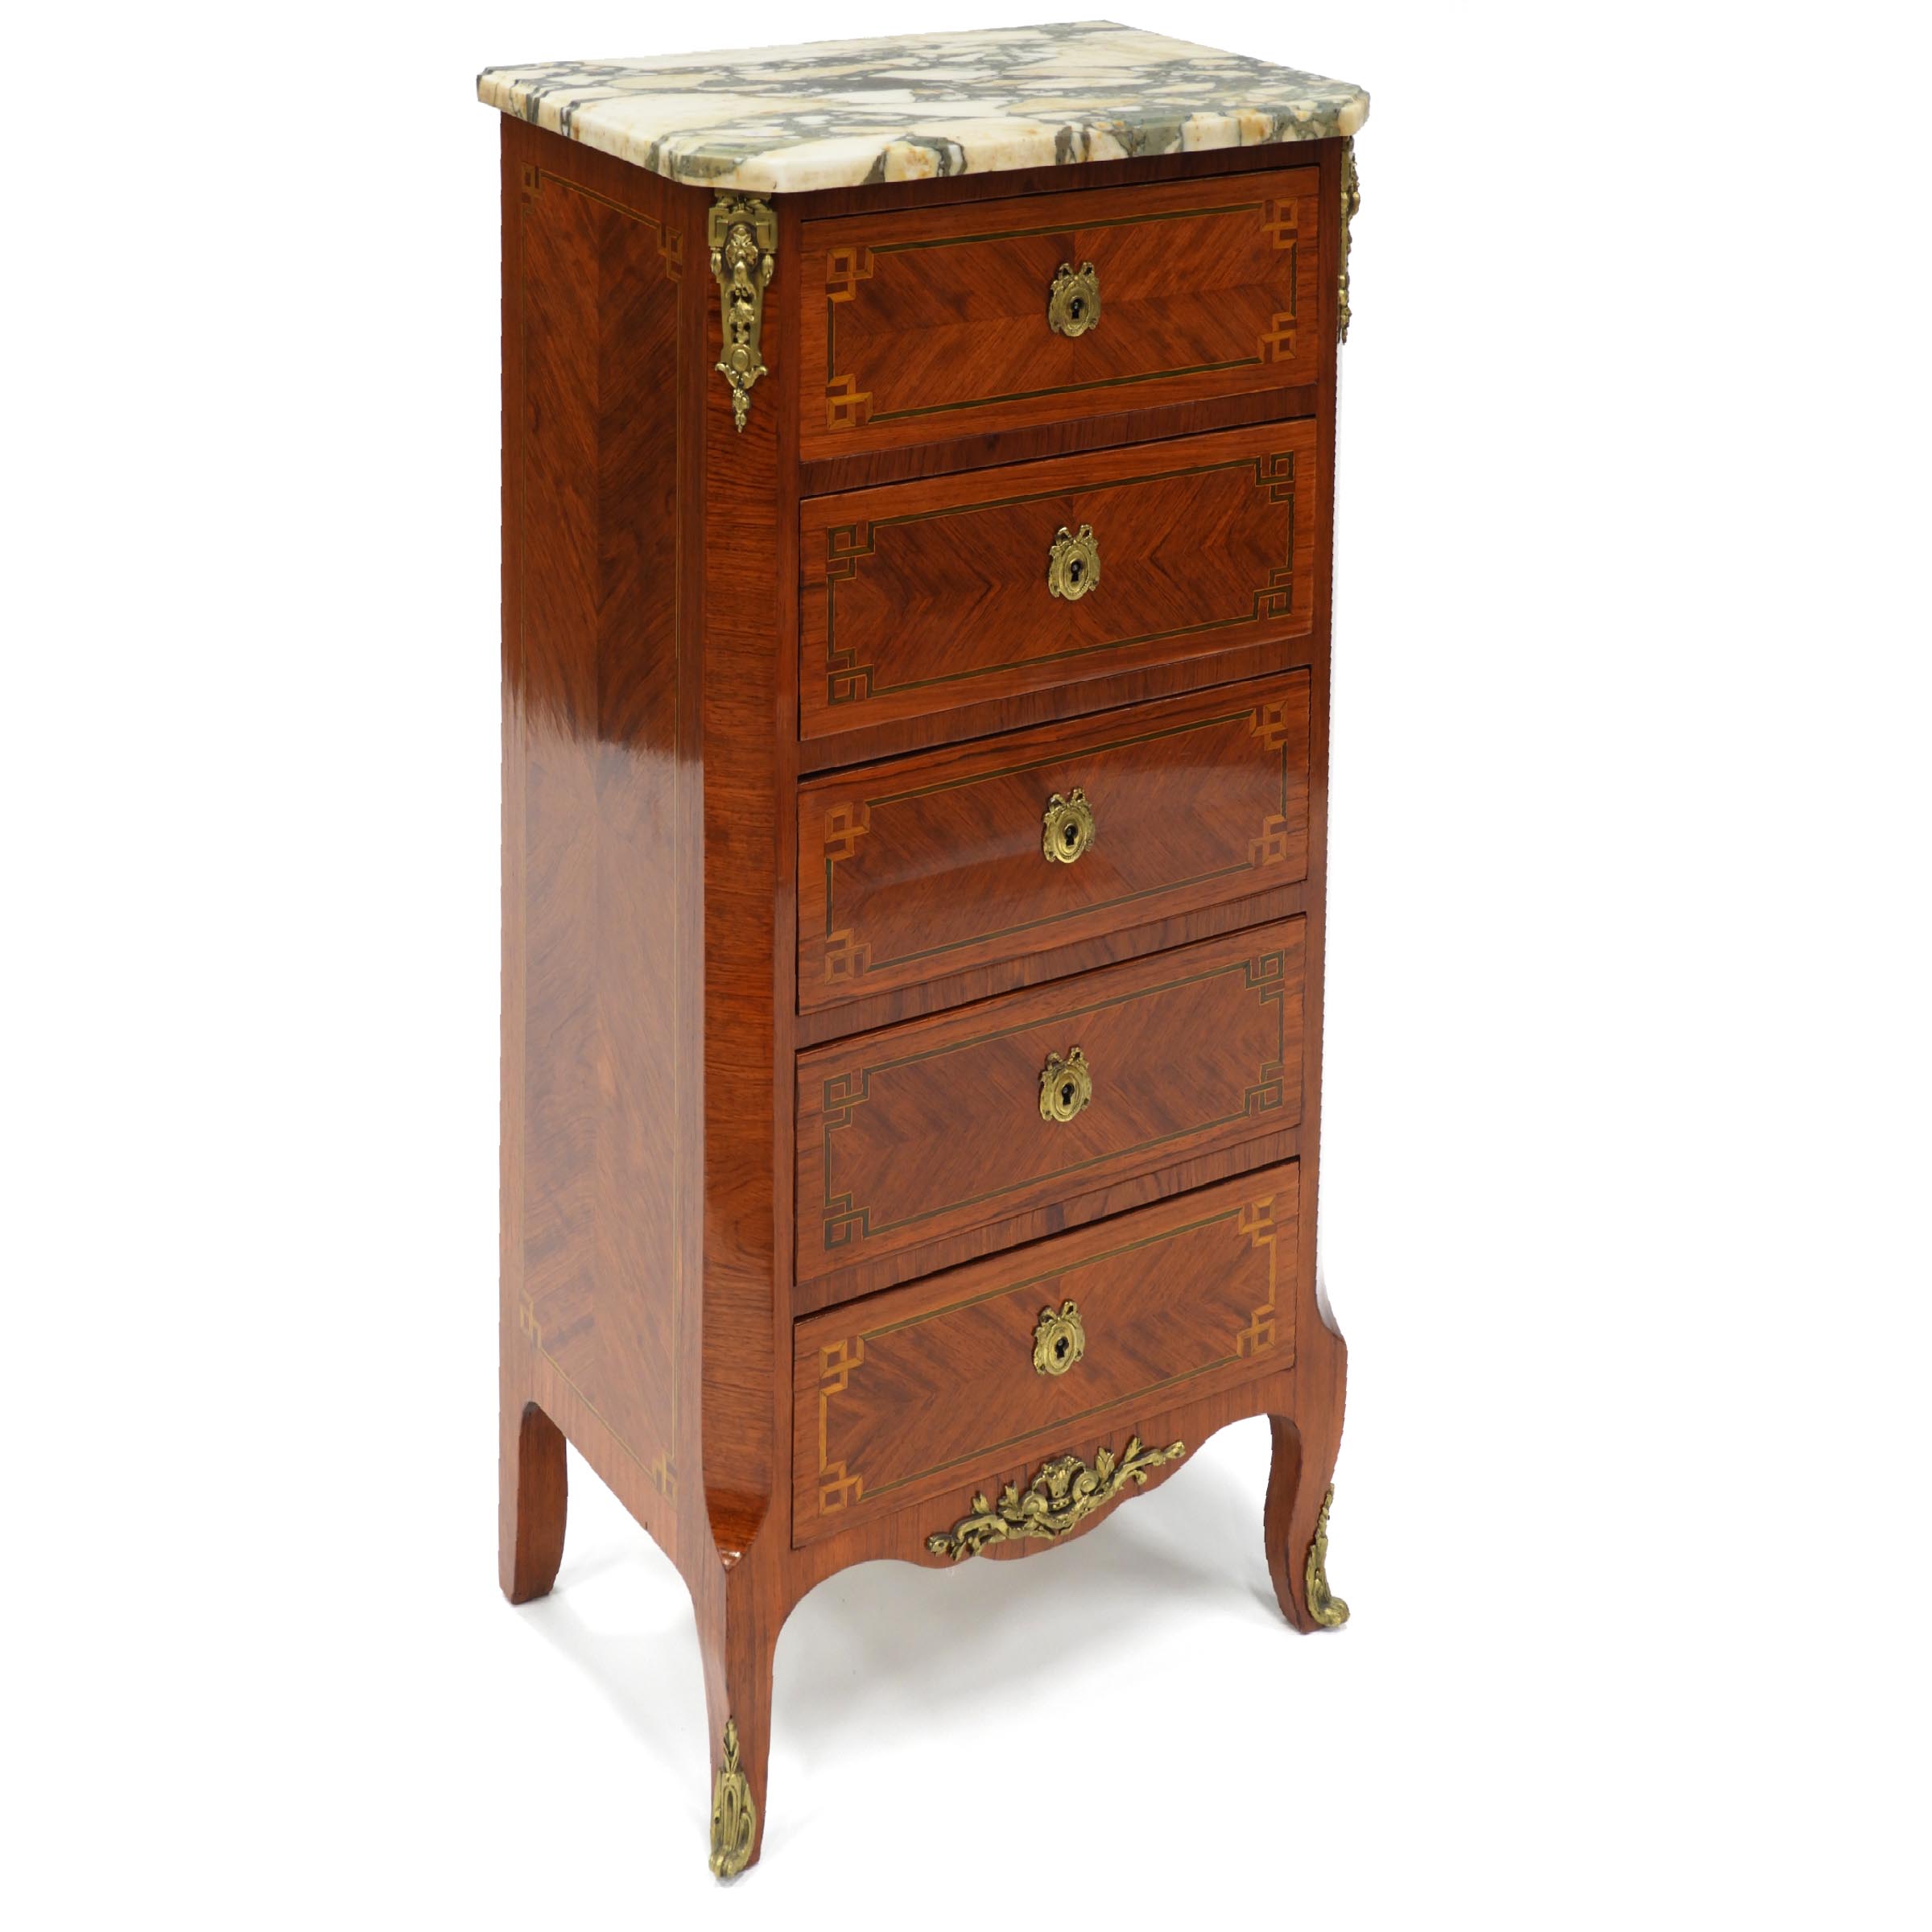 French Ormolu Mounted Parquetry Chiffonière, c.1900